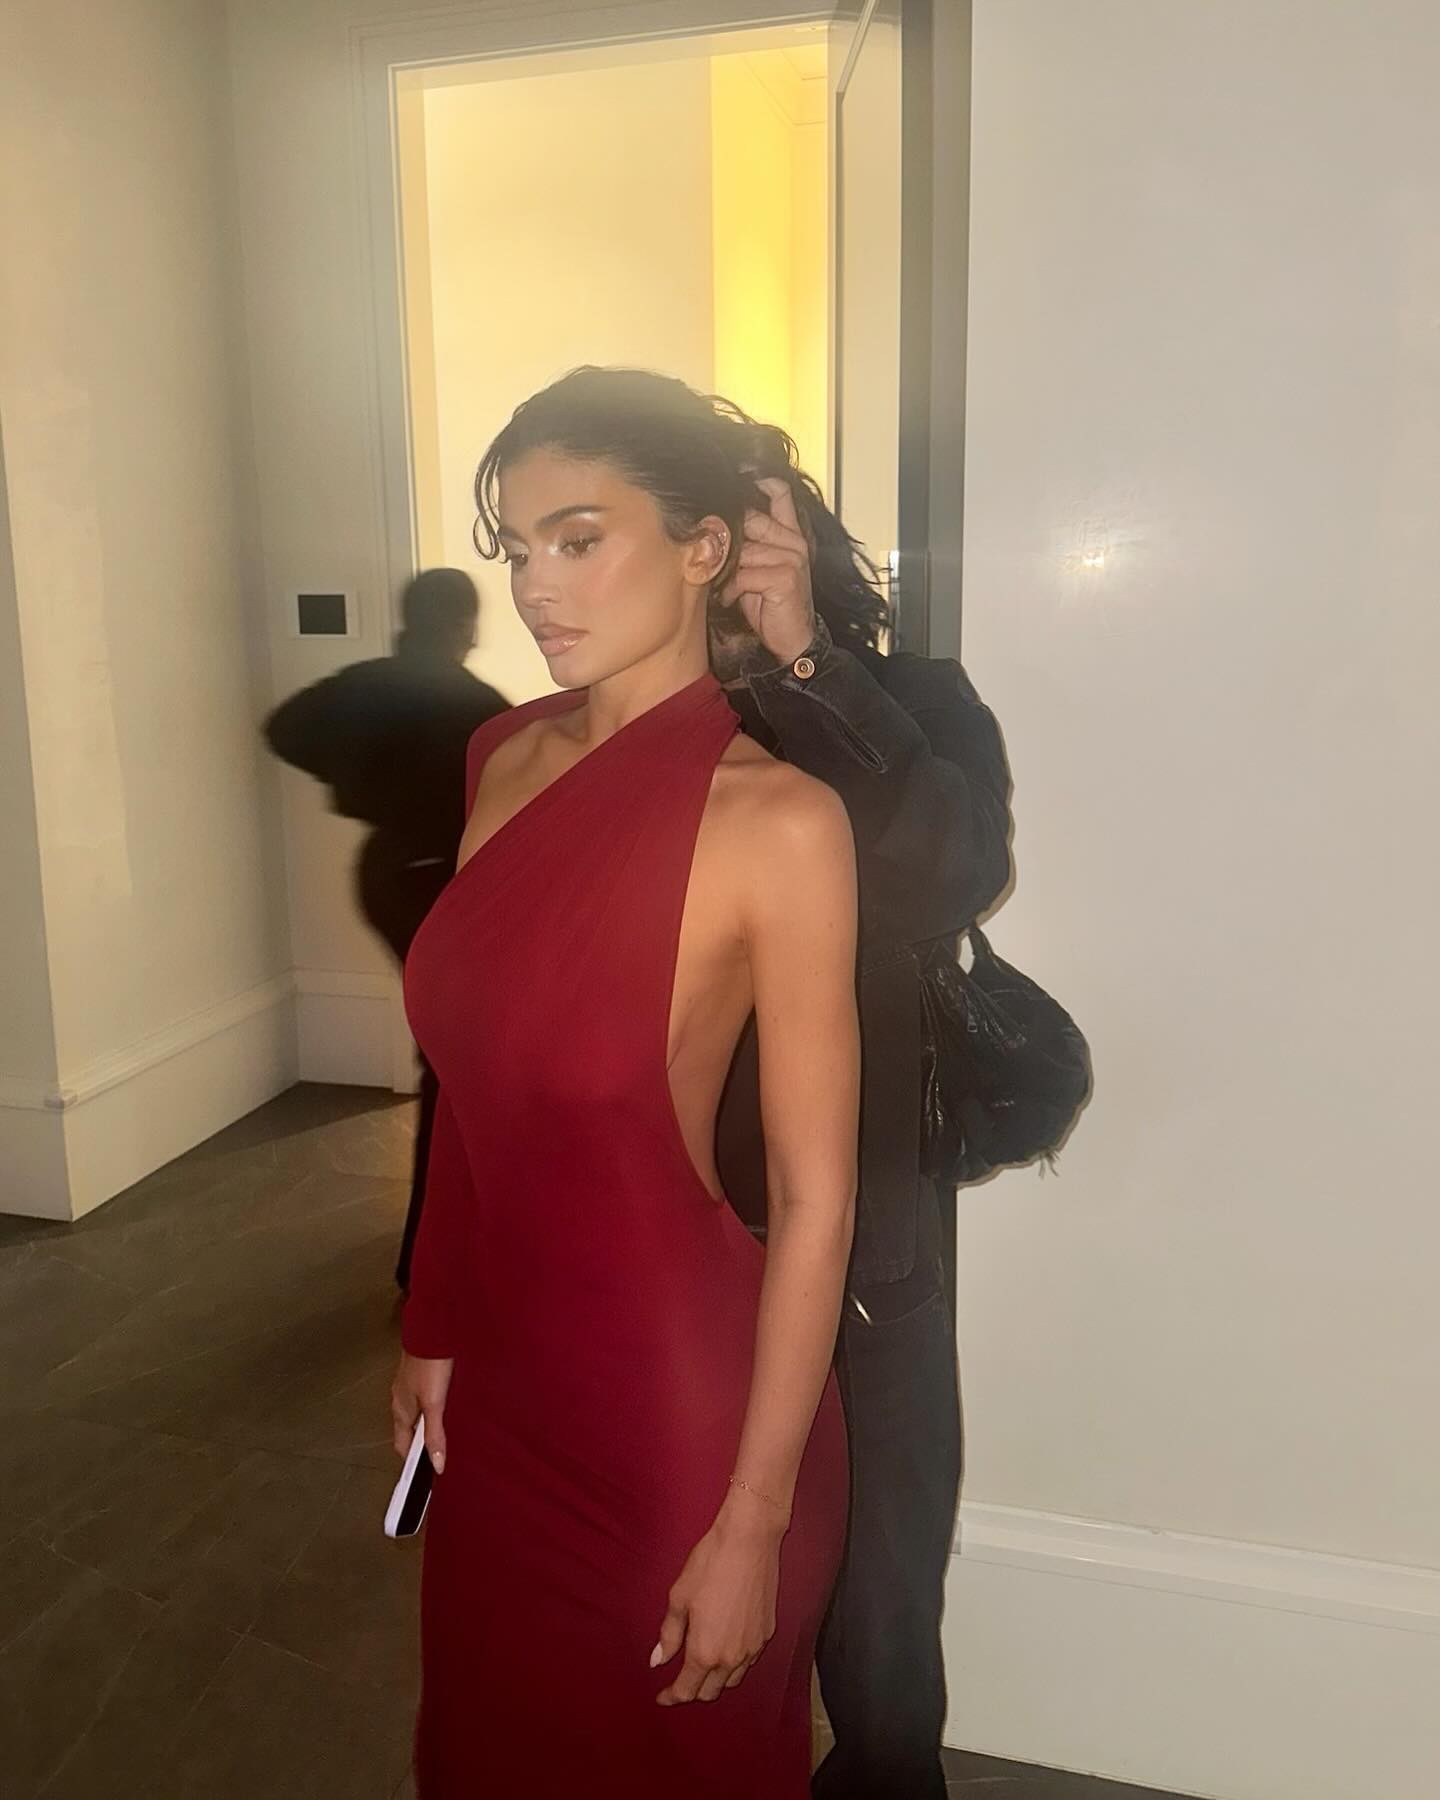 Fans thought she looked 'depressed' in the photos, and blamed it on Kylie's rumored Ozempic use